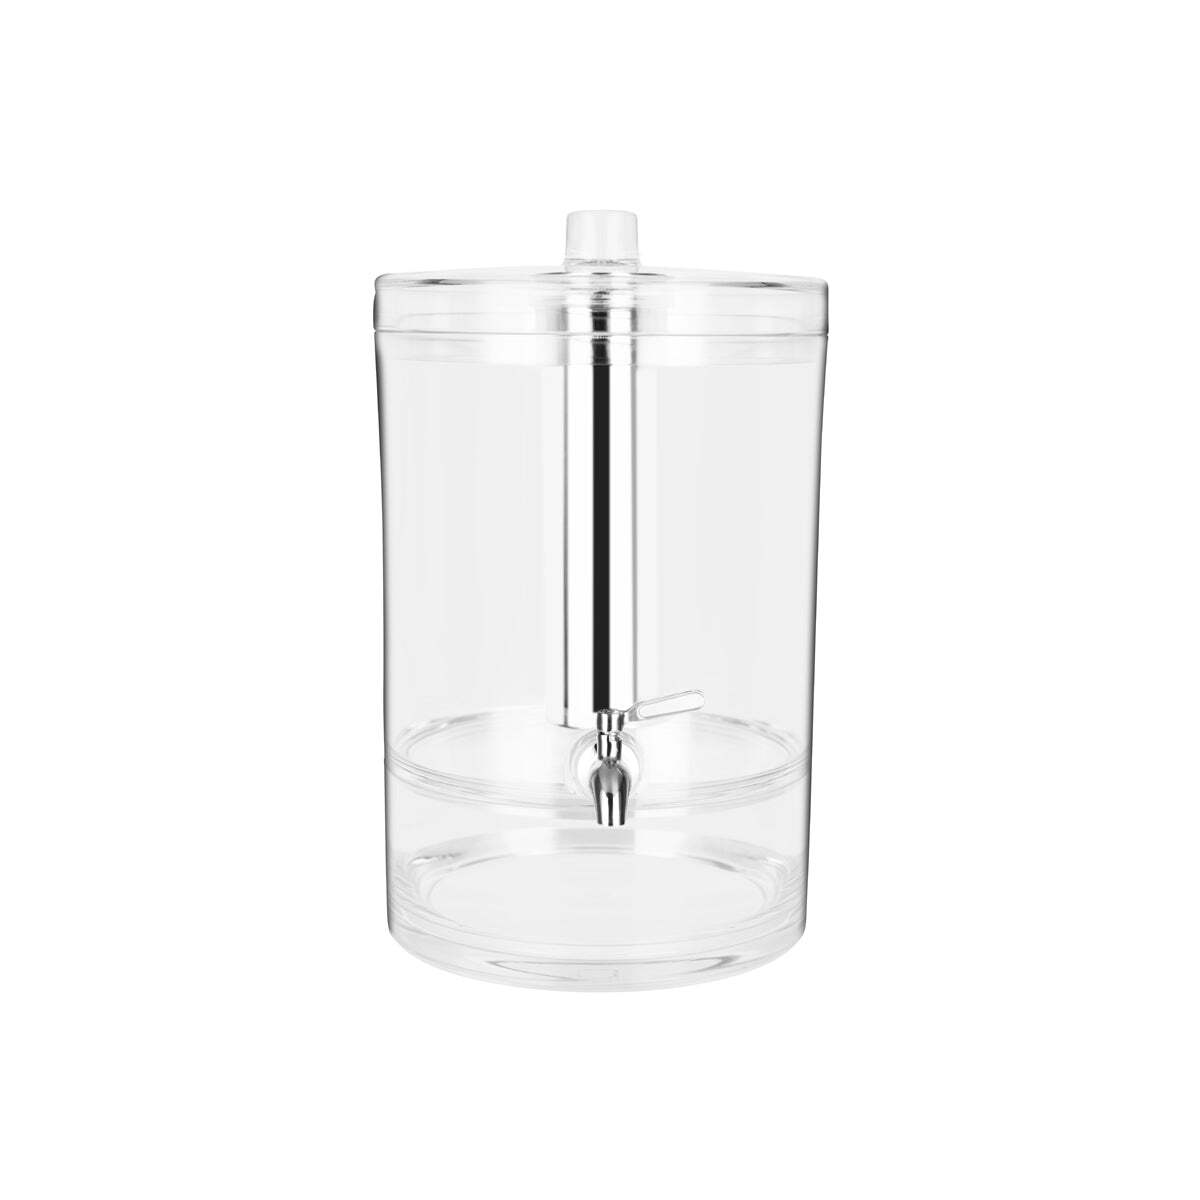 Glass Drink Dispenser for Parties - Set of 2-1 Gallon Glass Jar Beverage  Dispensers with Stand - Drinkware, Facebook Marketplace